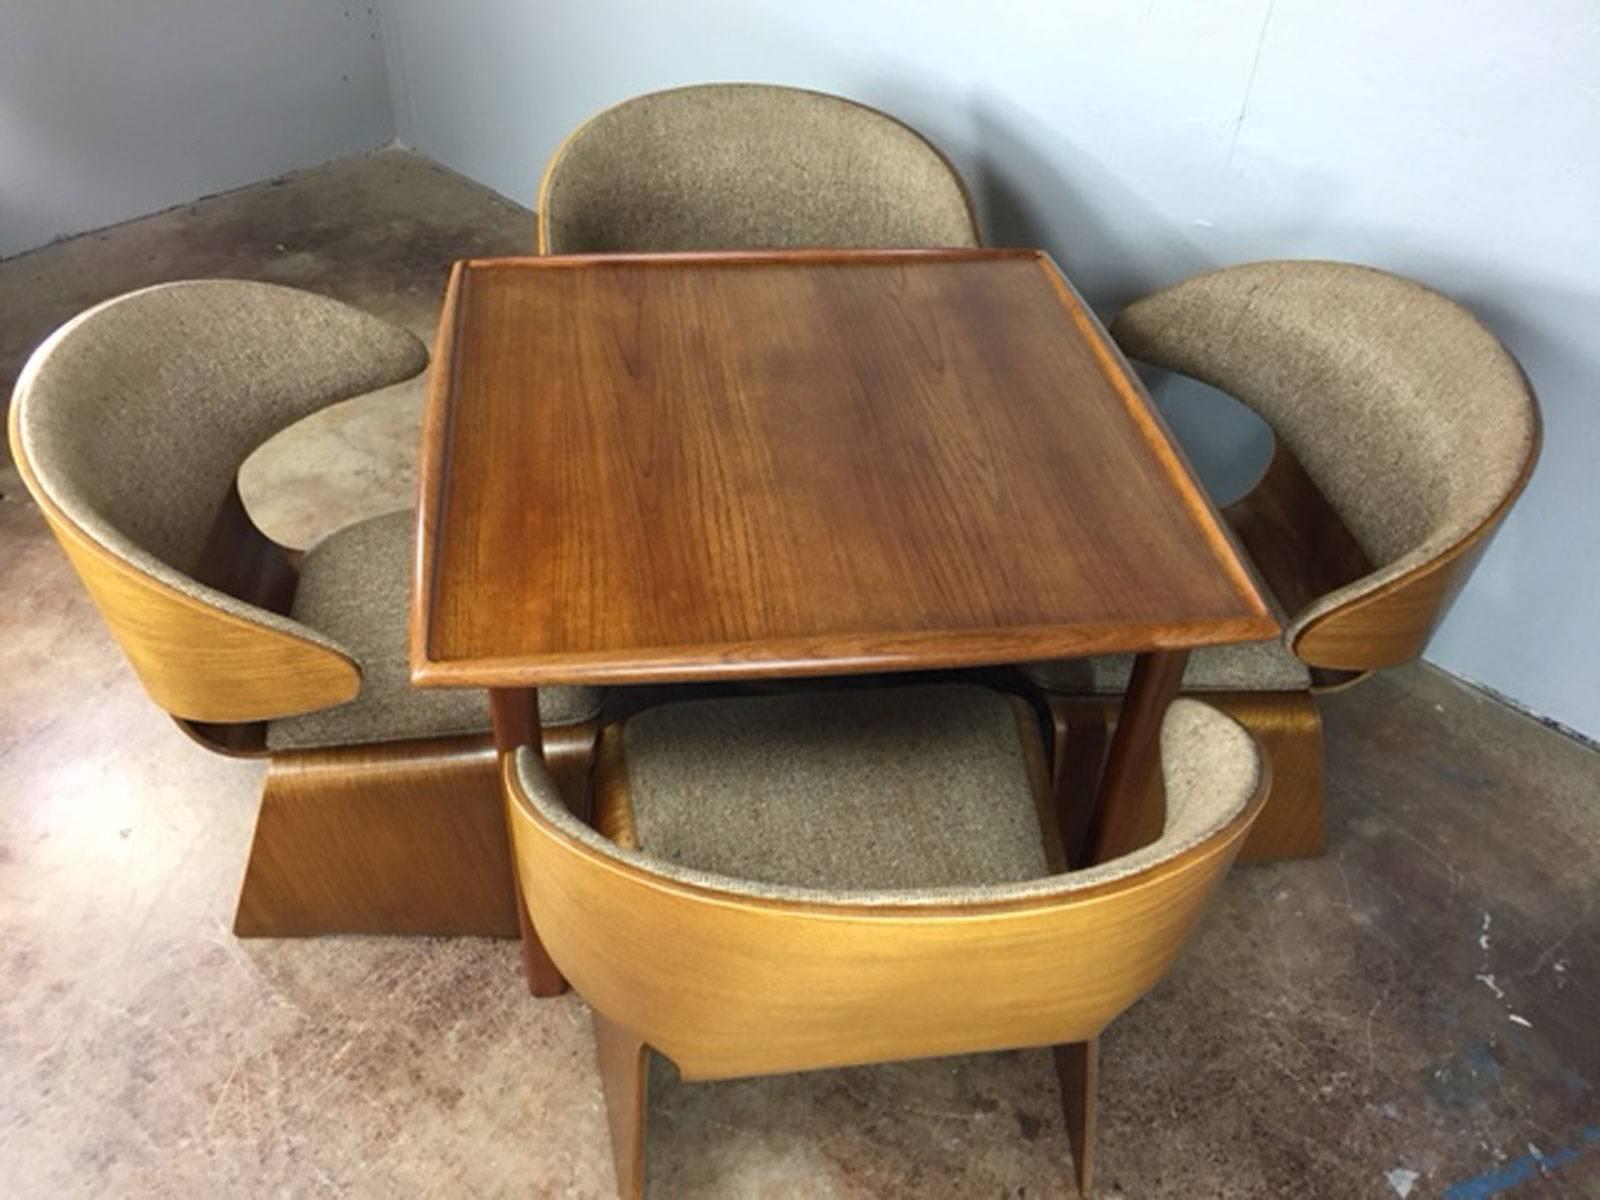 Rare set of four Hans Olsen set of four Bikini chairs and game table. Chairs were manufactured by Moreddi. Table maker is unknown but could also be Moreddi. Wood is in very good condition. Original fabric has no holes, tears, or rips, or unusual